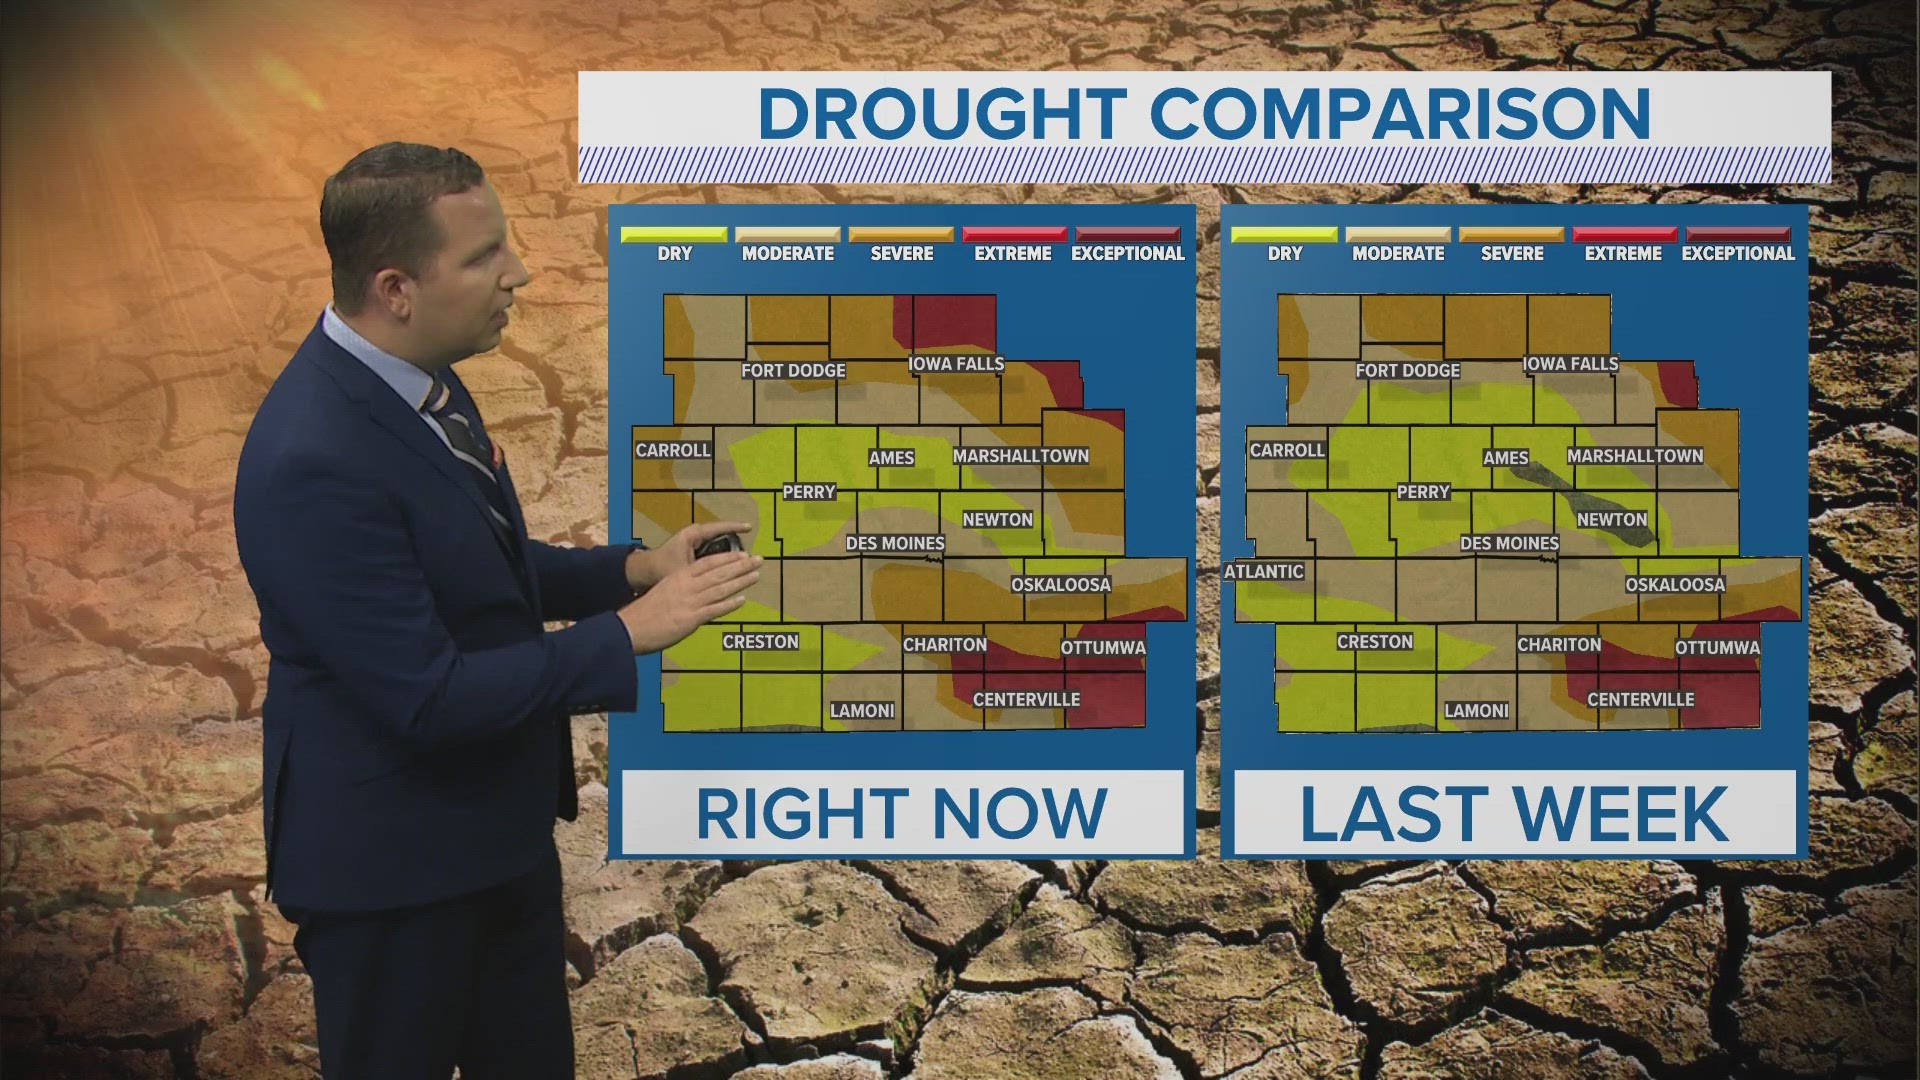 18% of Iowa is experiencing extreme drought, and the prospect for meaningful rain in the next few weeks is slim.